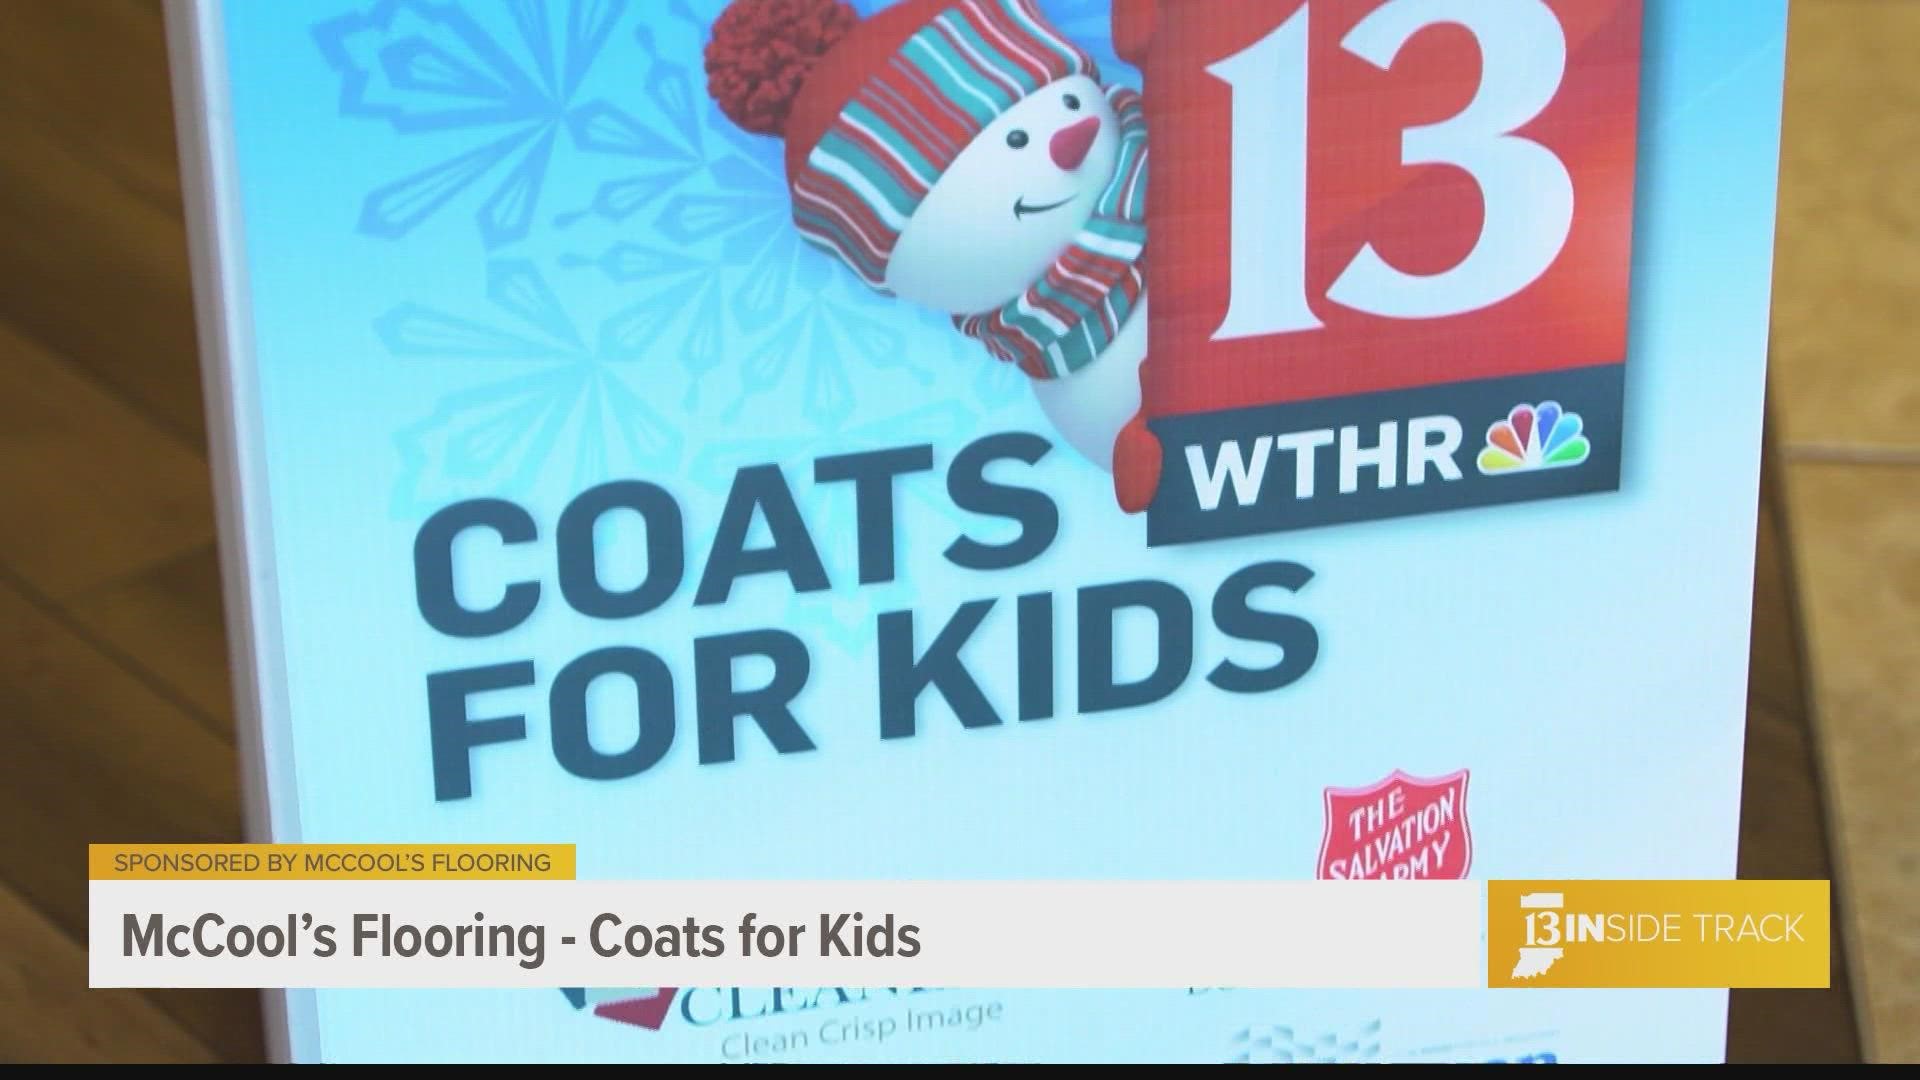 McCool's has collected  donations for Coats for Kids for years and loves giving back to their community.